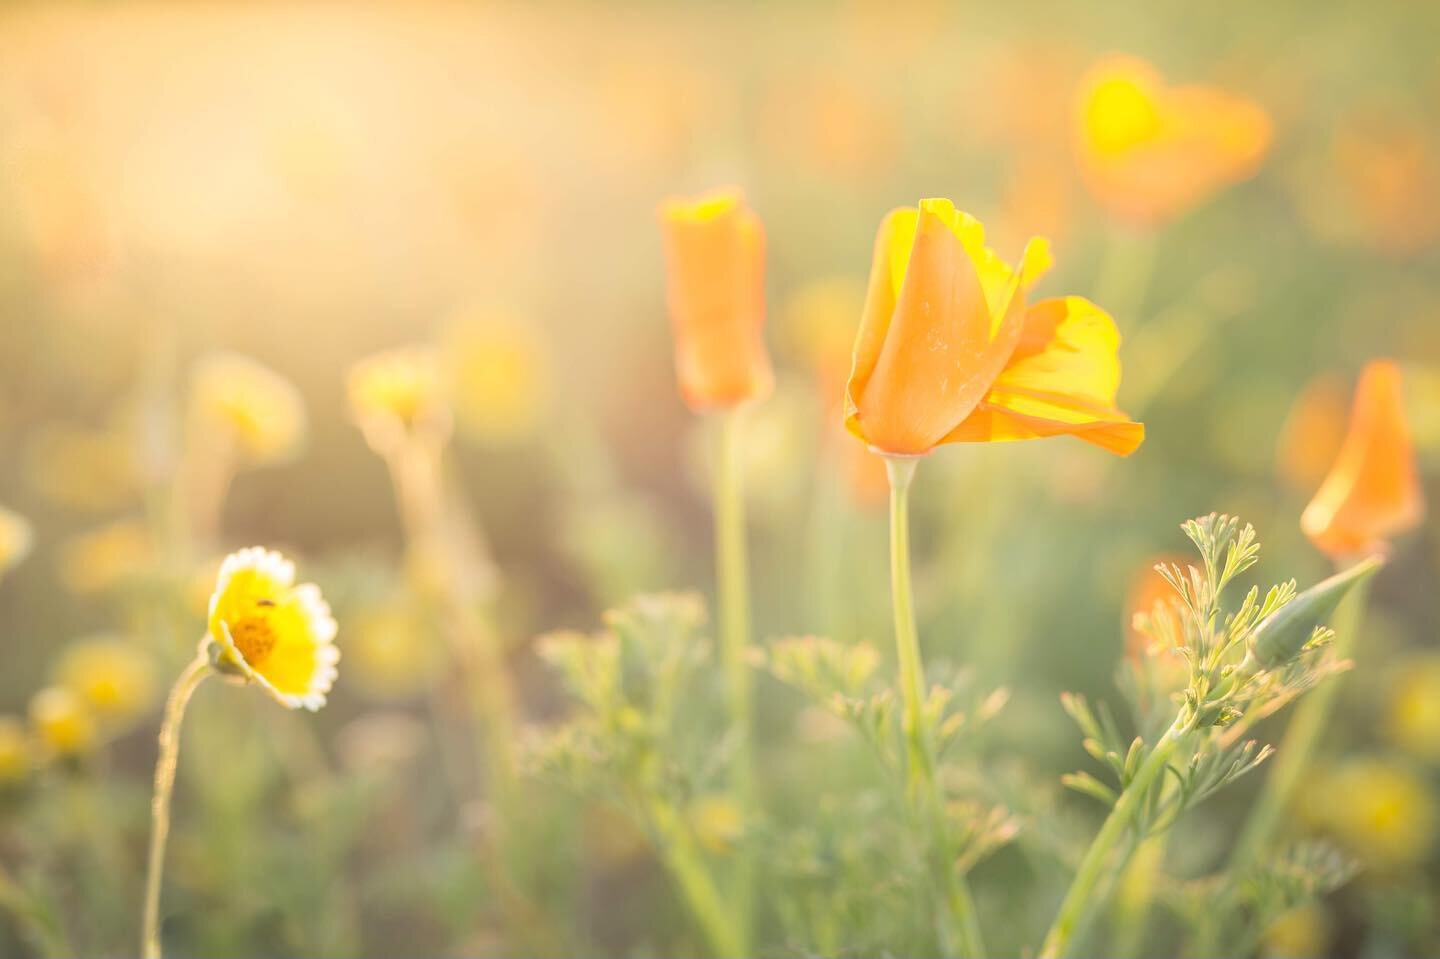 I just discovered it&rsquo;s California Poppy Day! Love those cheery poppies&hellip; especially when they are backlit! 😎

#wildforflowers
#bloomandgrow
#underthefloralspell
#flowerstagram
#beautifulblooms
#myfloraldays
#wildaboutflowers
#flowerslove